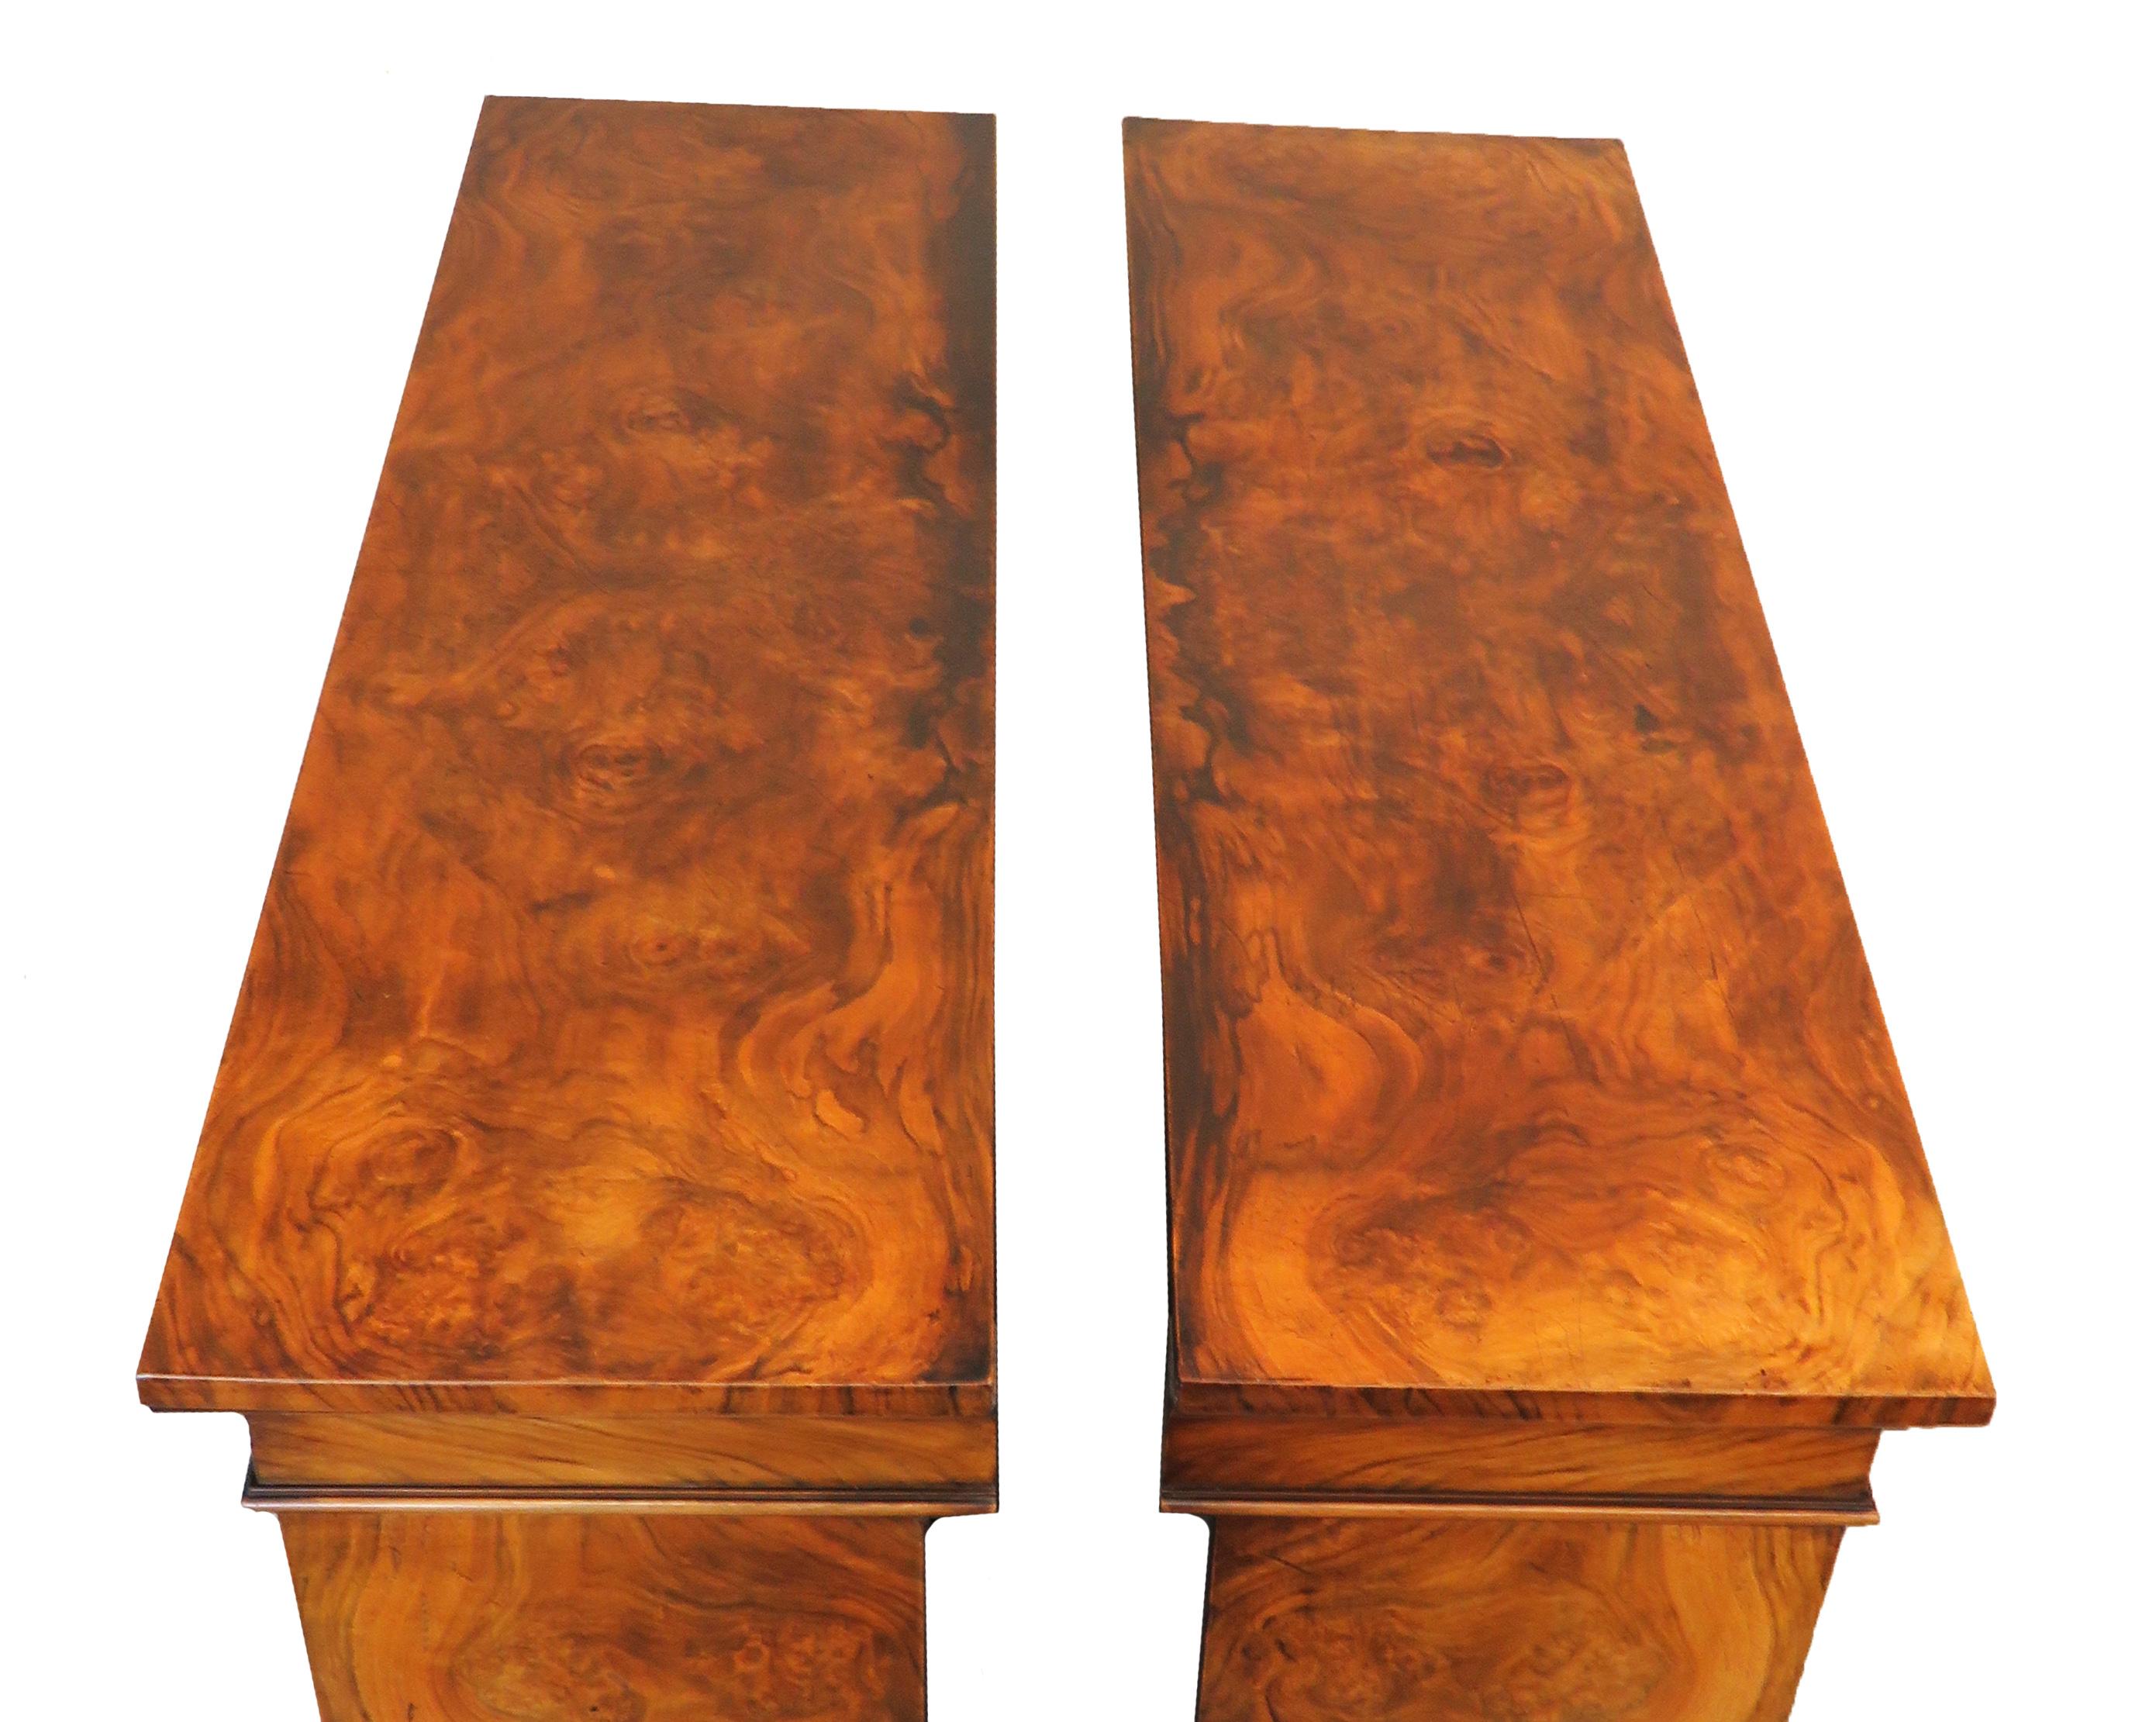 A fine quality pair of mid-19th century English burr walnut
dwarf open bookcases of good proportions having
superbly figured rectangular tops over adjustable
shelves and extremely well figured ends raised on
original plinth bases.

(These